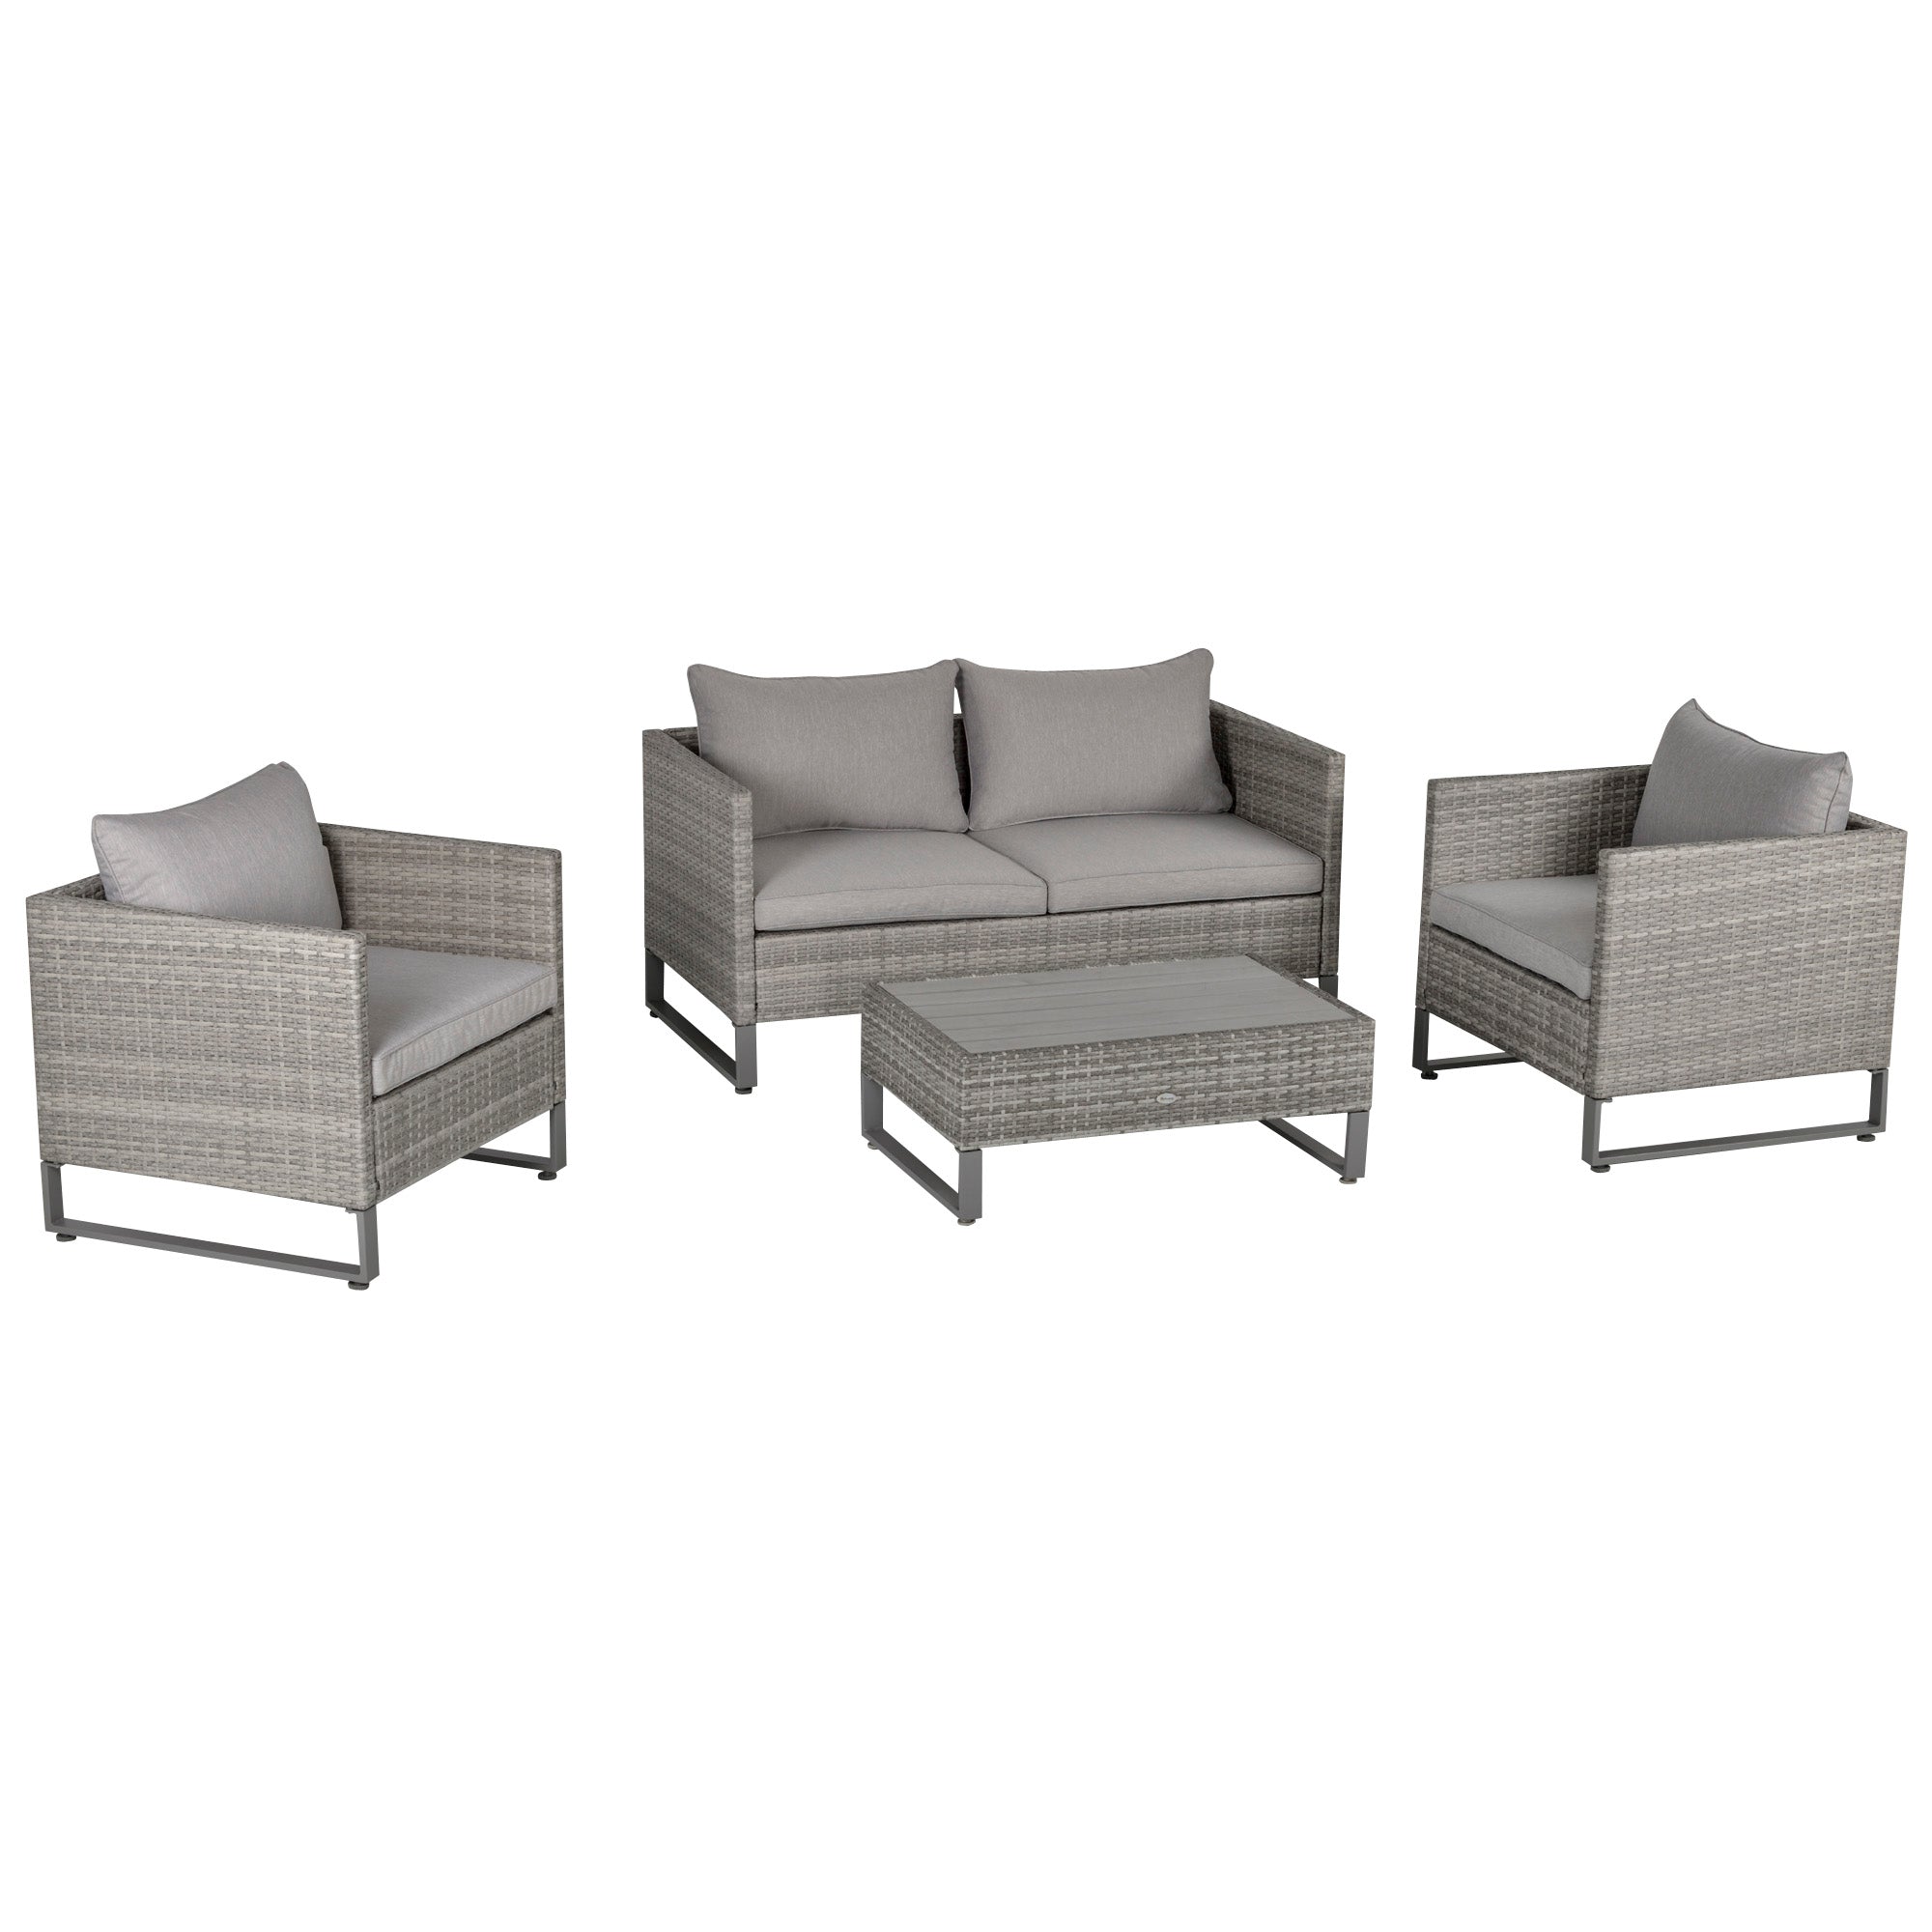 Outsunny 4 PCs PE Rattan Wicker Outdoor Dining Set Sofa Chairs Table Cushions  | TJ Hughes